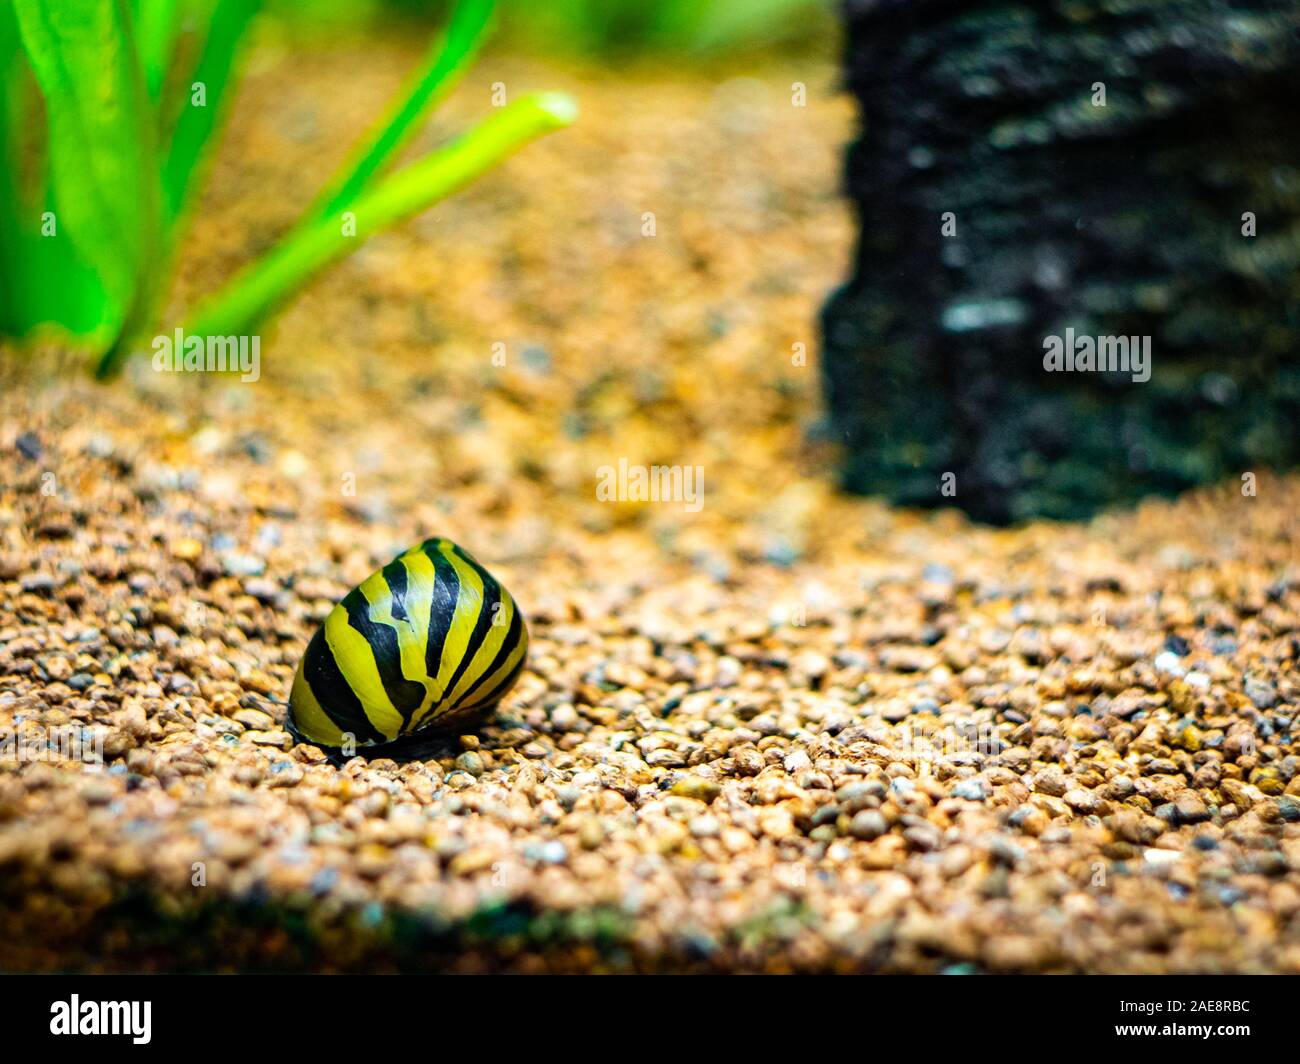 spotted nerite snail (Neritina natalensis) eating on a rock in a fish tank Stock Photo